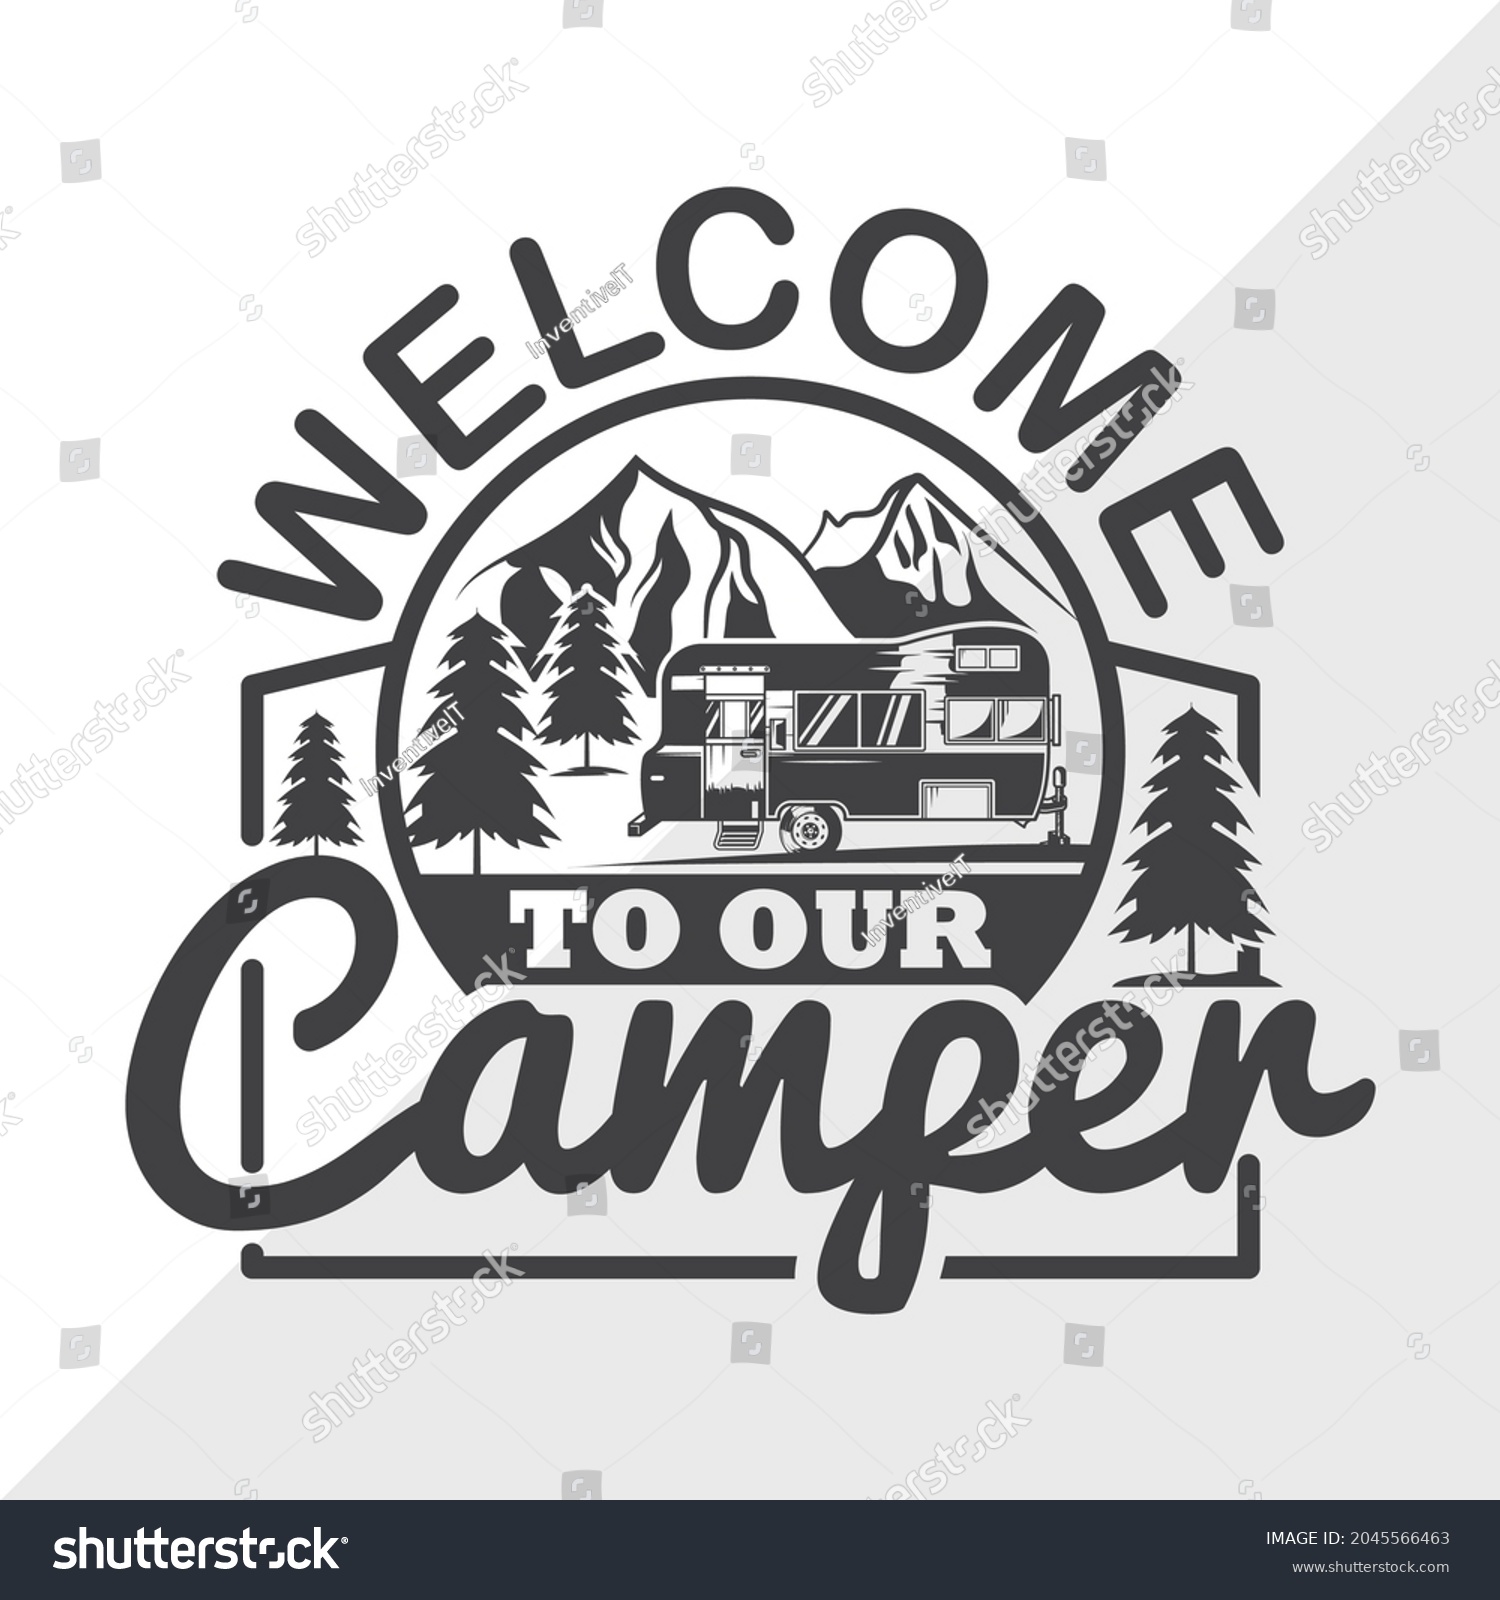 SVG of Welcome To Our Camper, Camping, Hiking, Printable Vector Illustration svg